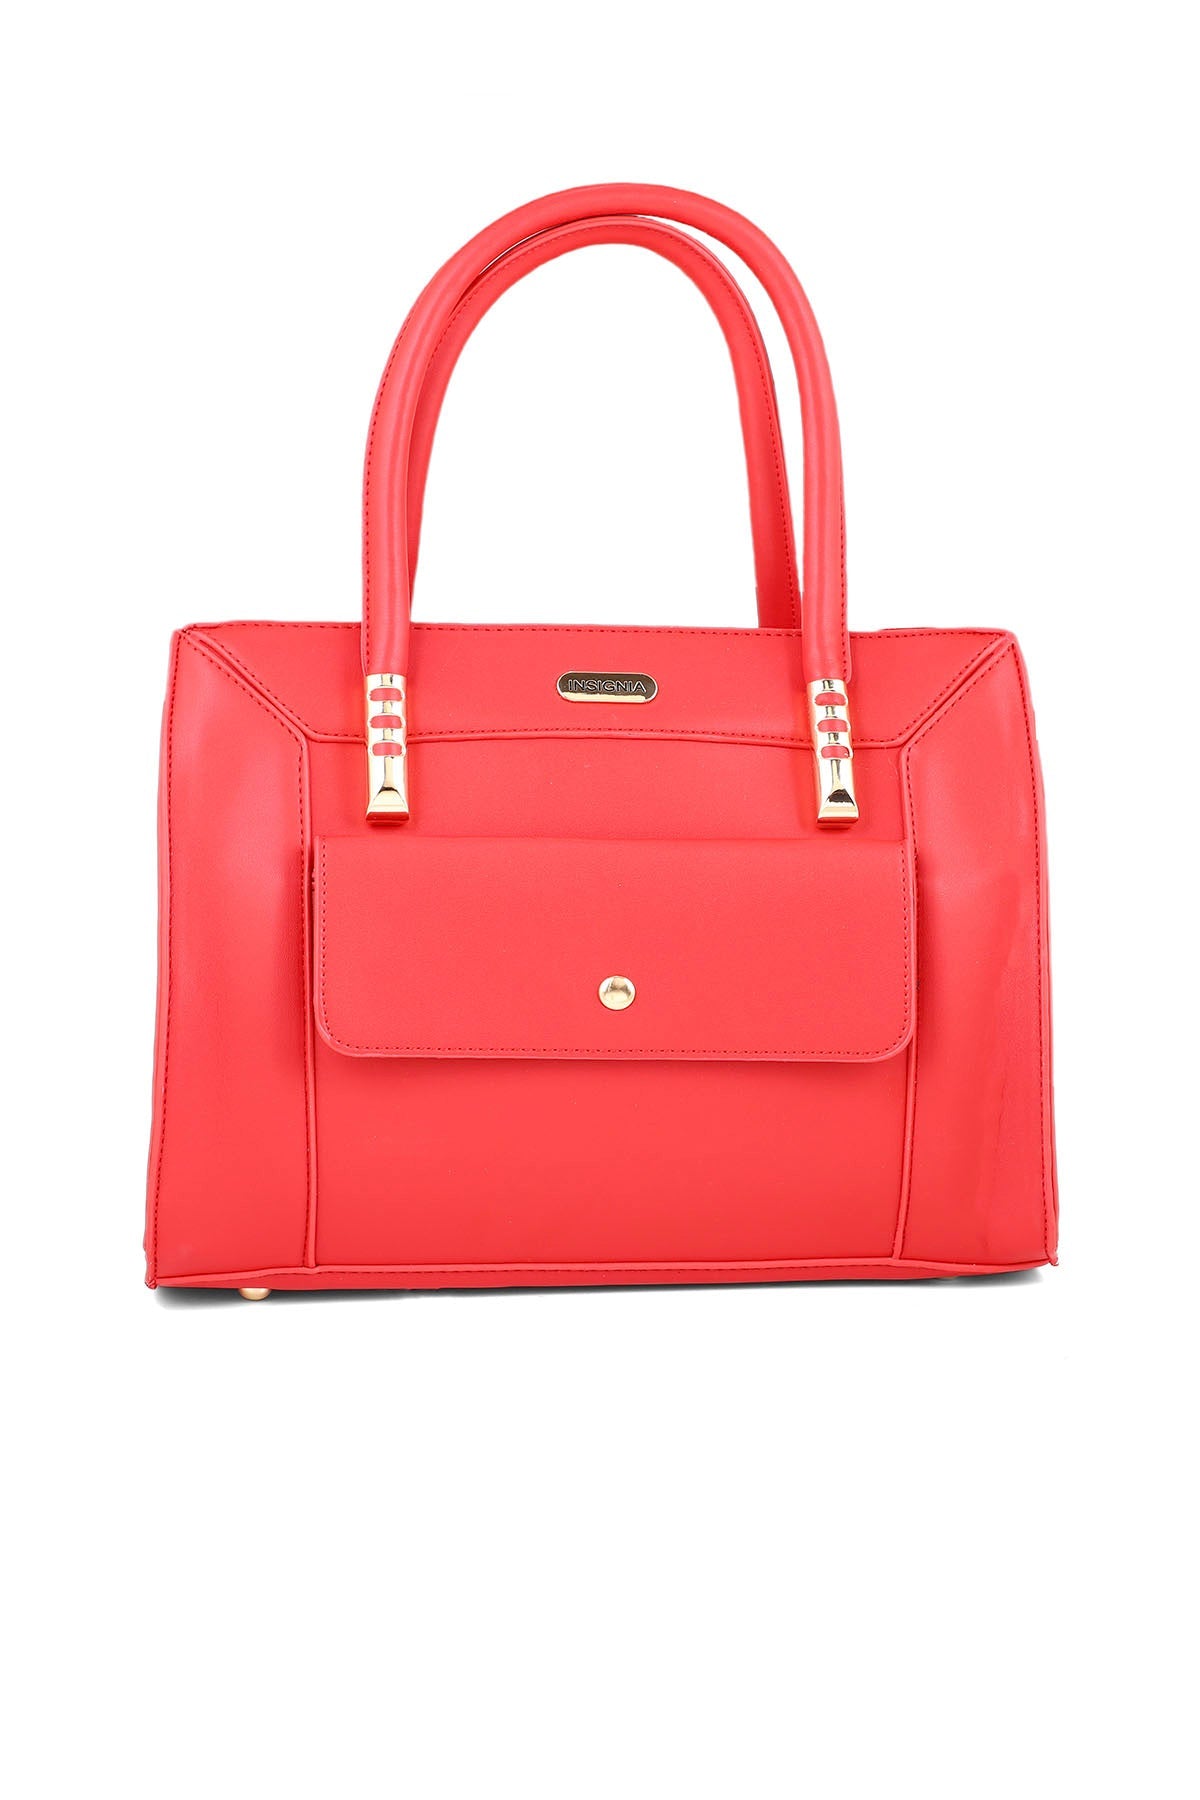 Formal Tote Hand Bags B15129-Red